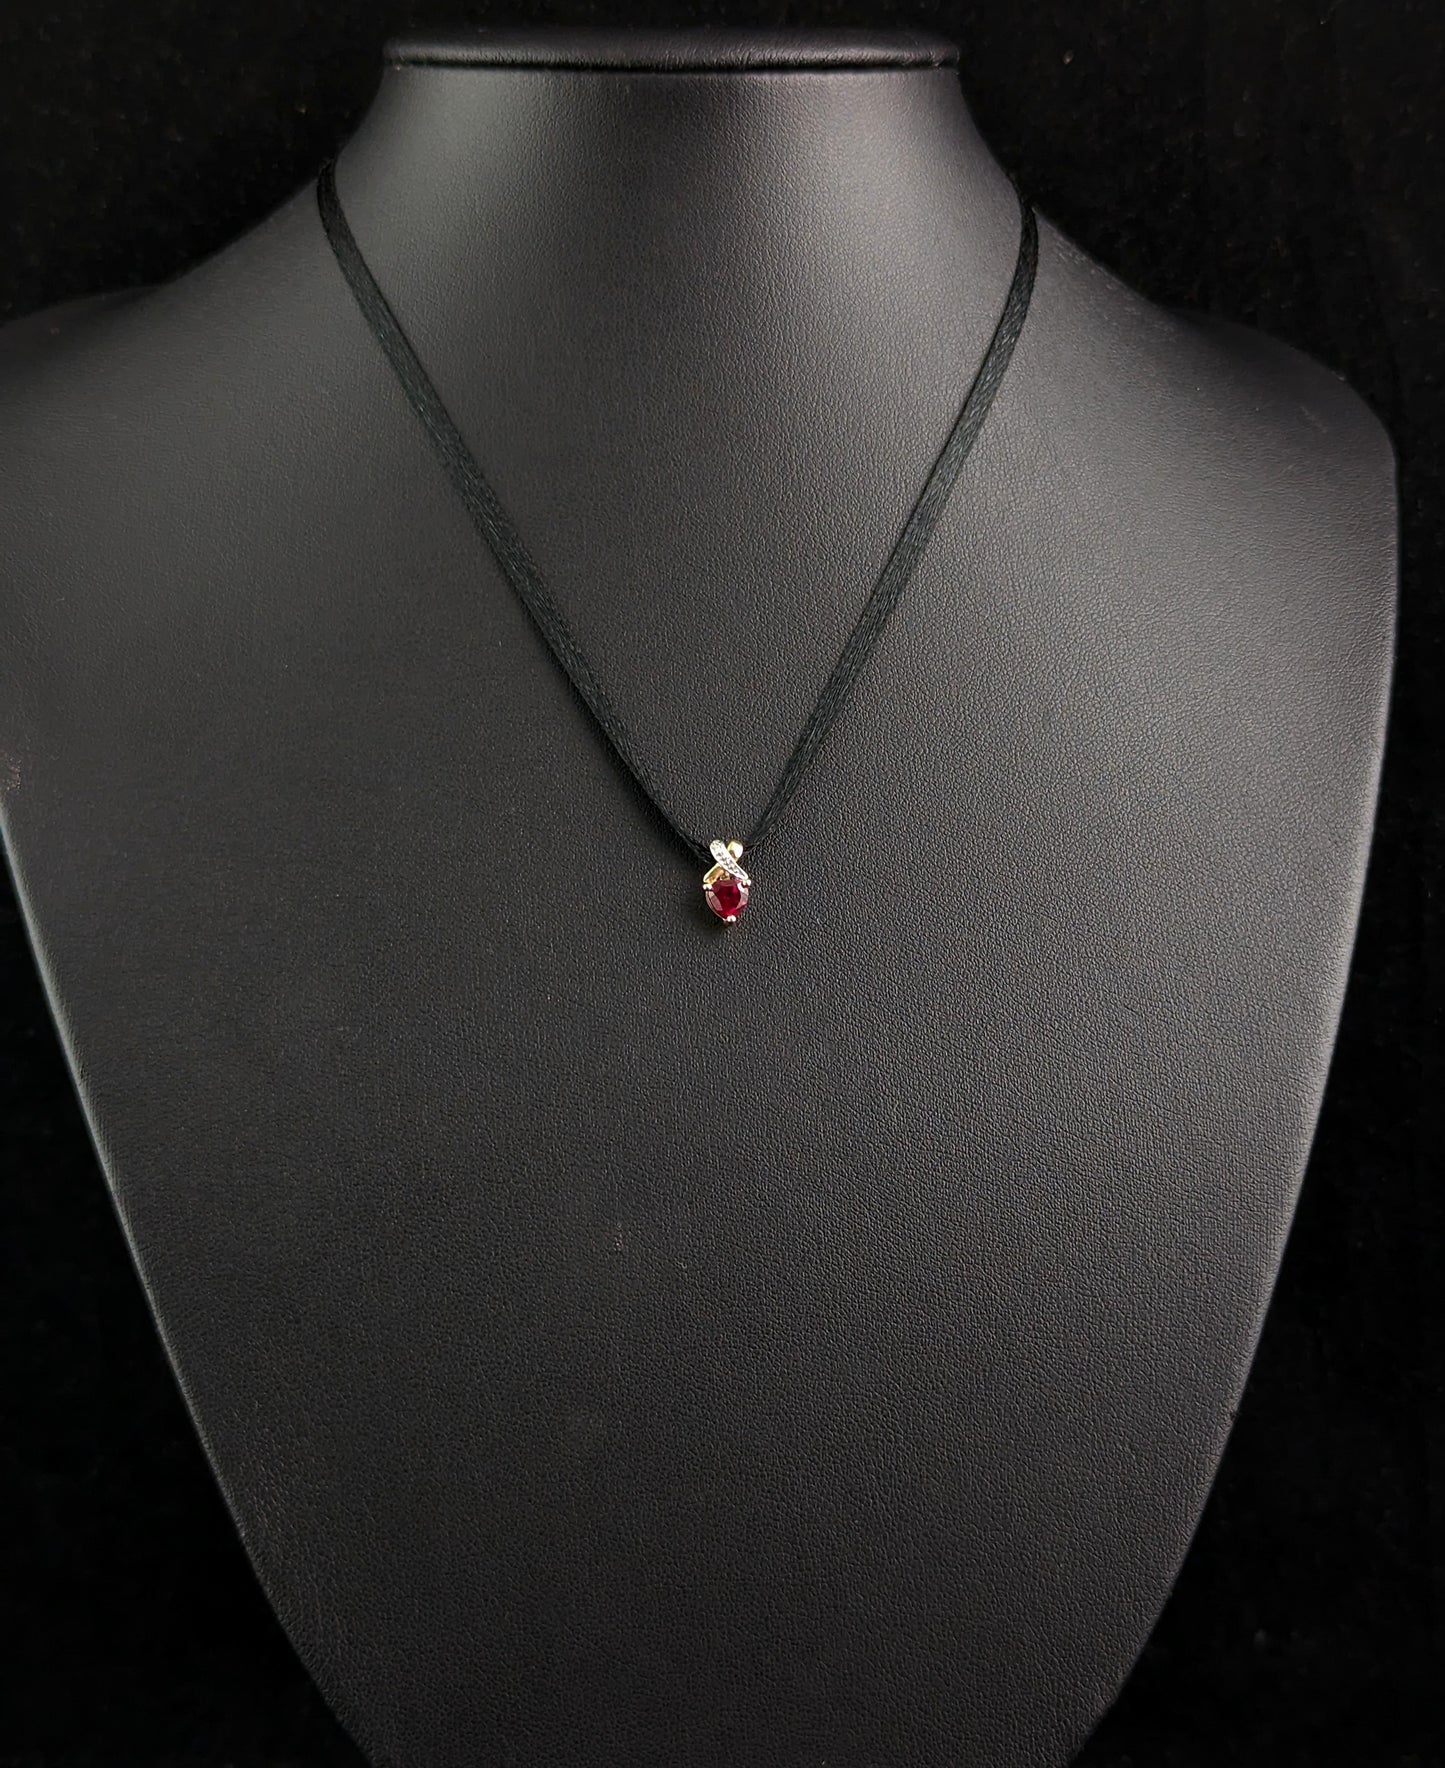 Tiny Vintage Synthetic Ruby and diamond heart pendant